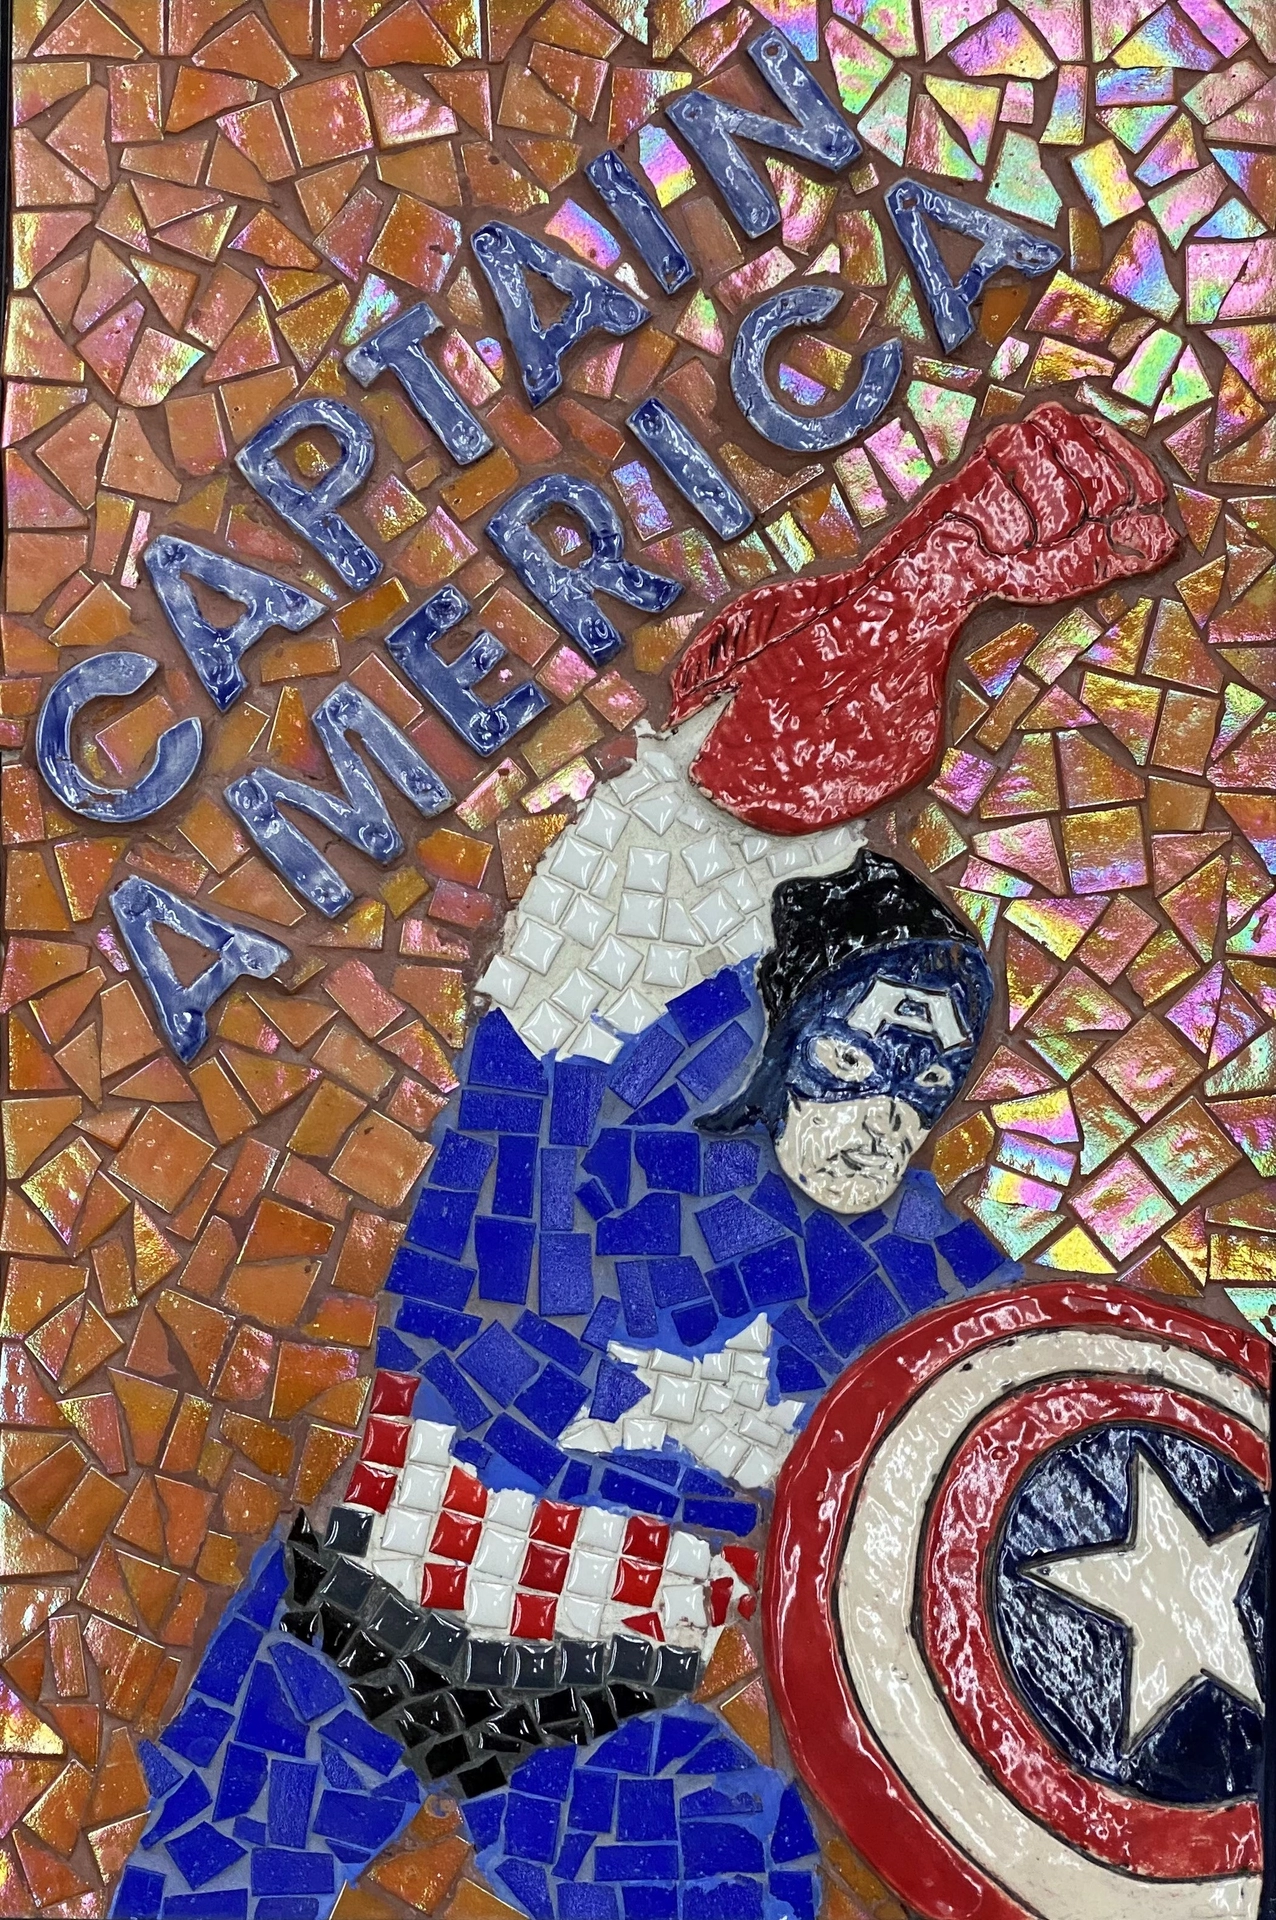 This handmade mosaic/ceramic piece in vertical rectangular format is framed in black. The classic American comic book hero Captain America is wearing his iconic red, white, and blue costume. His arm is outstretched up and out in a display of his power. The background is made up of broken orange pieces of ceramic tile.